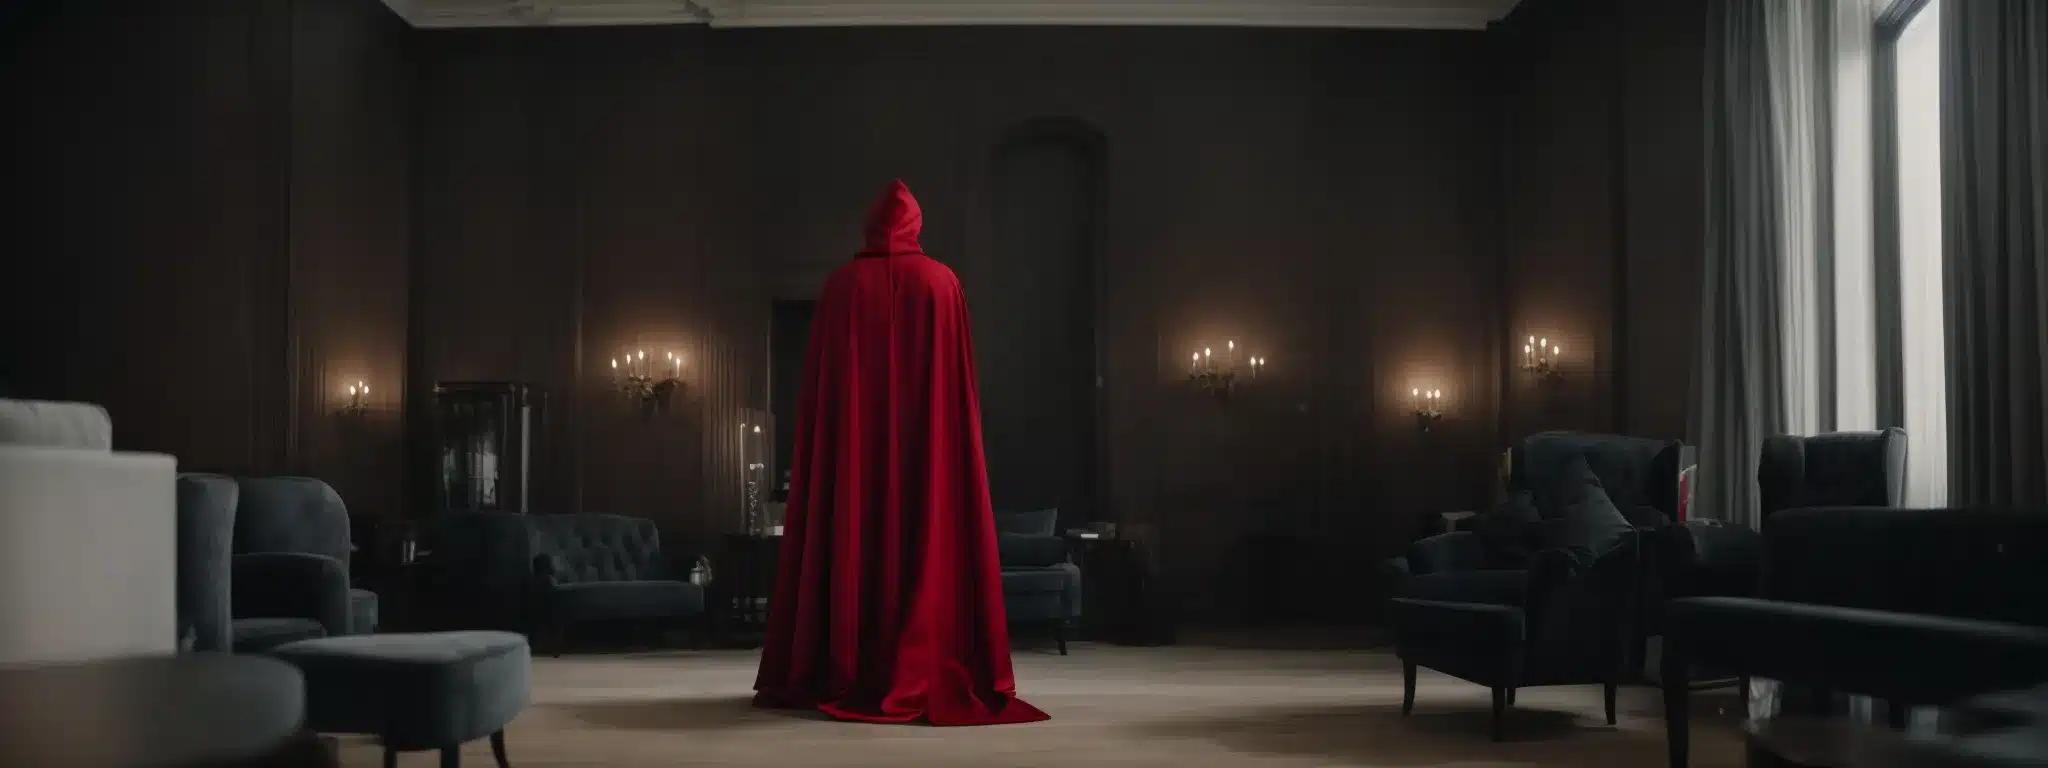 A Vibrant Red Cape Stands Out In A Room Full Of Indistinct Grey Suits.